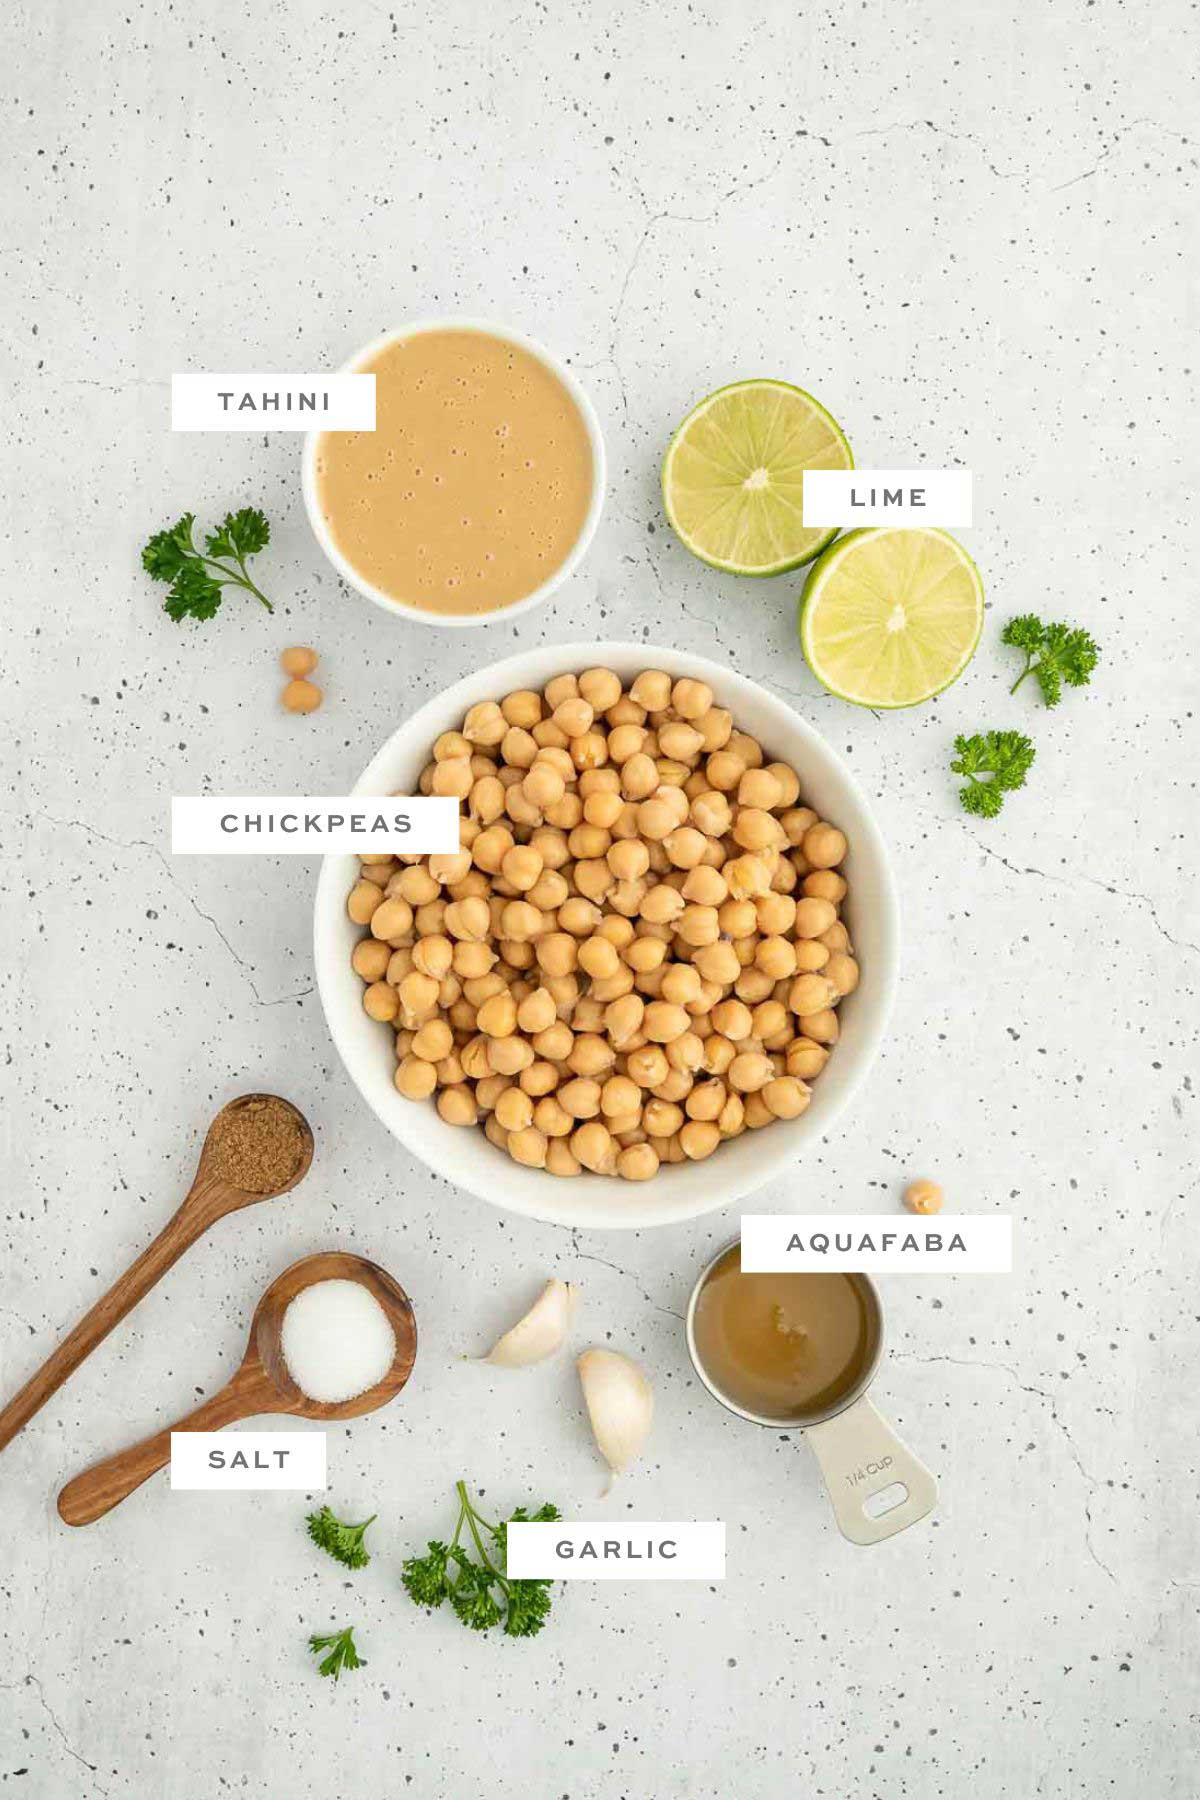 Key ingredients for oil-free hummus with labels.